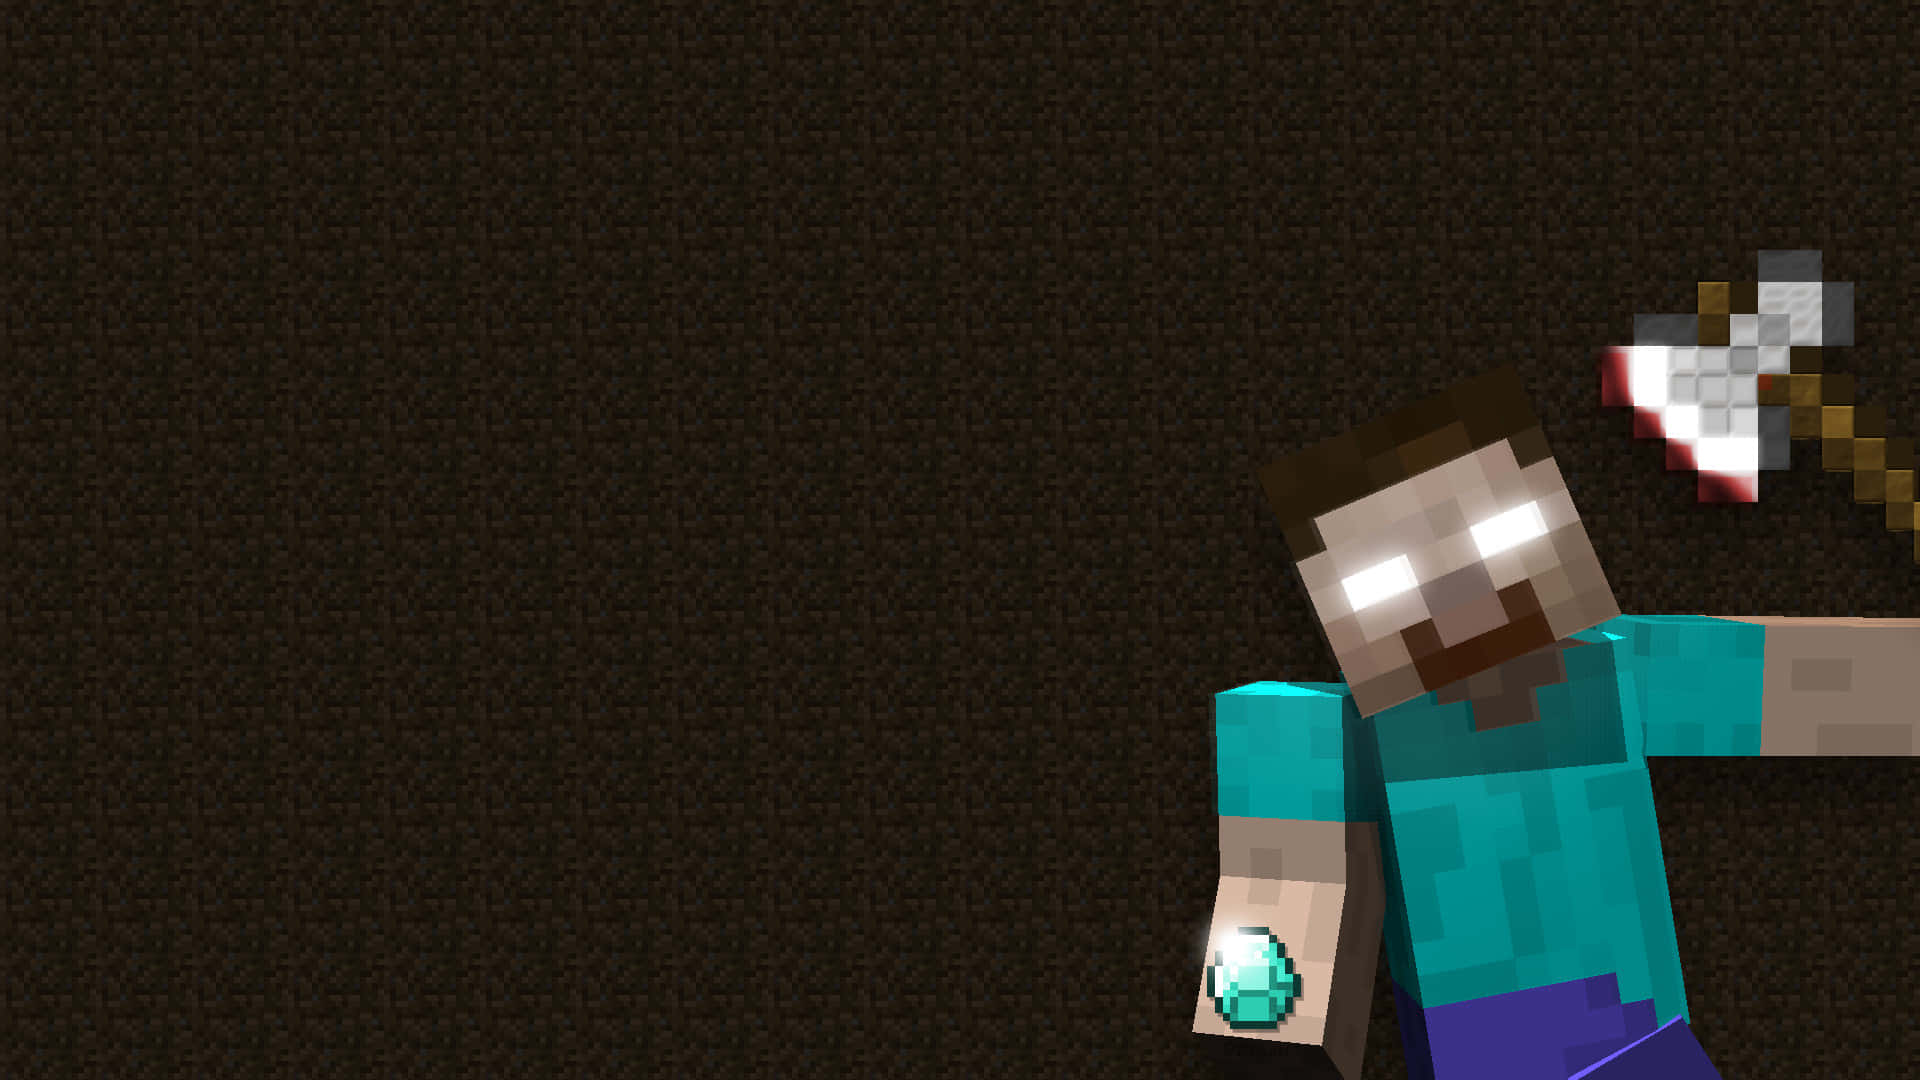 "Hello World - Herobrine, the mysterious character in the world of Minecraft"